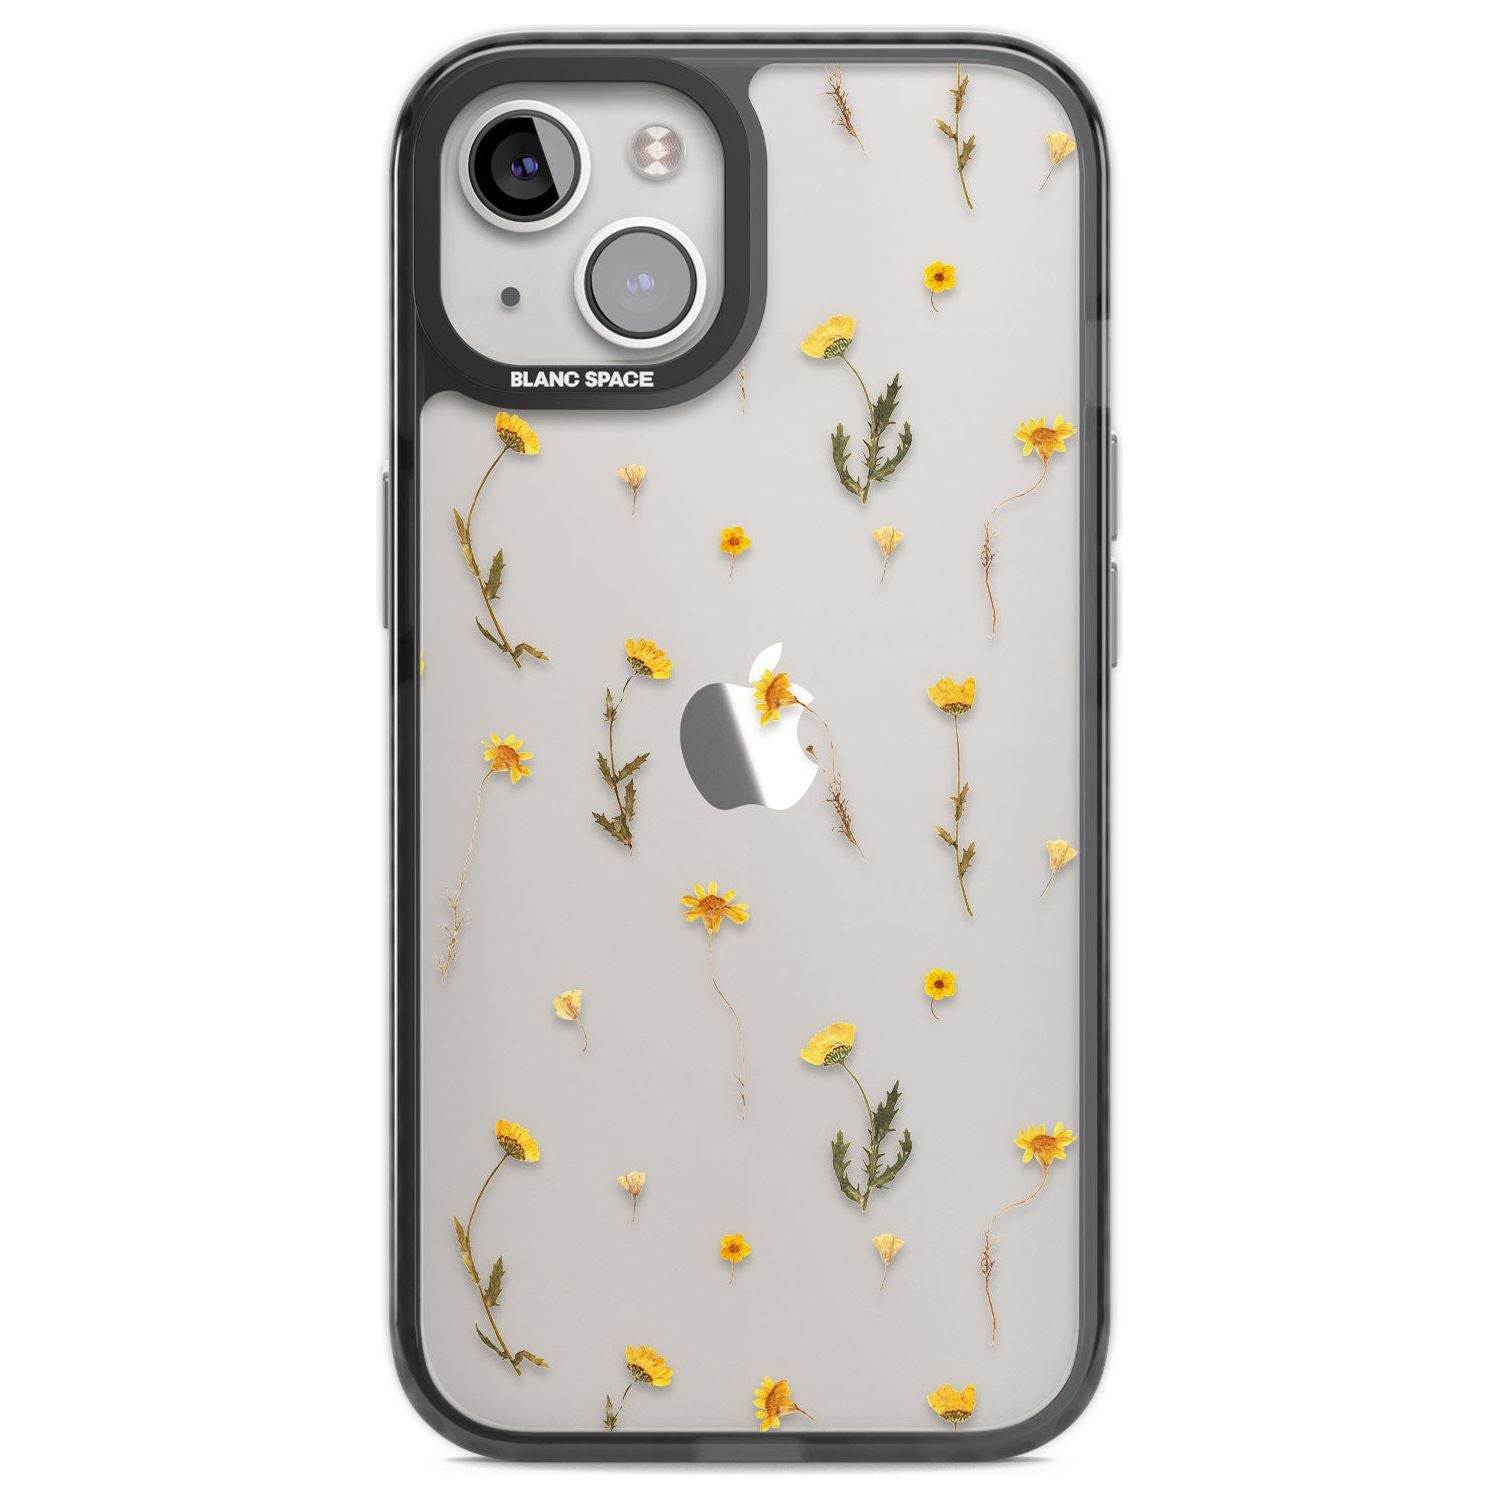 Mixed Yellow Flowers - Dried Flower-Inspired Phone Case iPhone 12 / Black Impact Case,iPhone 13 / Black Impact Case,iPhone 12 Pro / Black Impact Case,iPhone 14 / Black Impact Case,iPhone 15 Plus / Black Impact Case,iPhone 15 / Black Impact Case Blanc Space